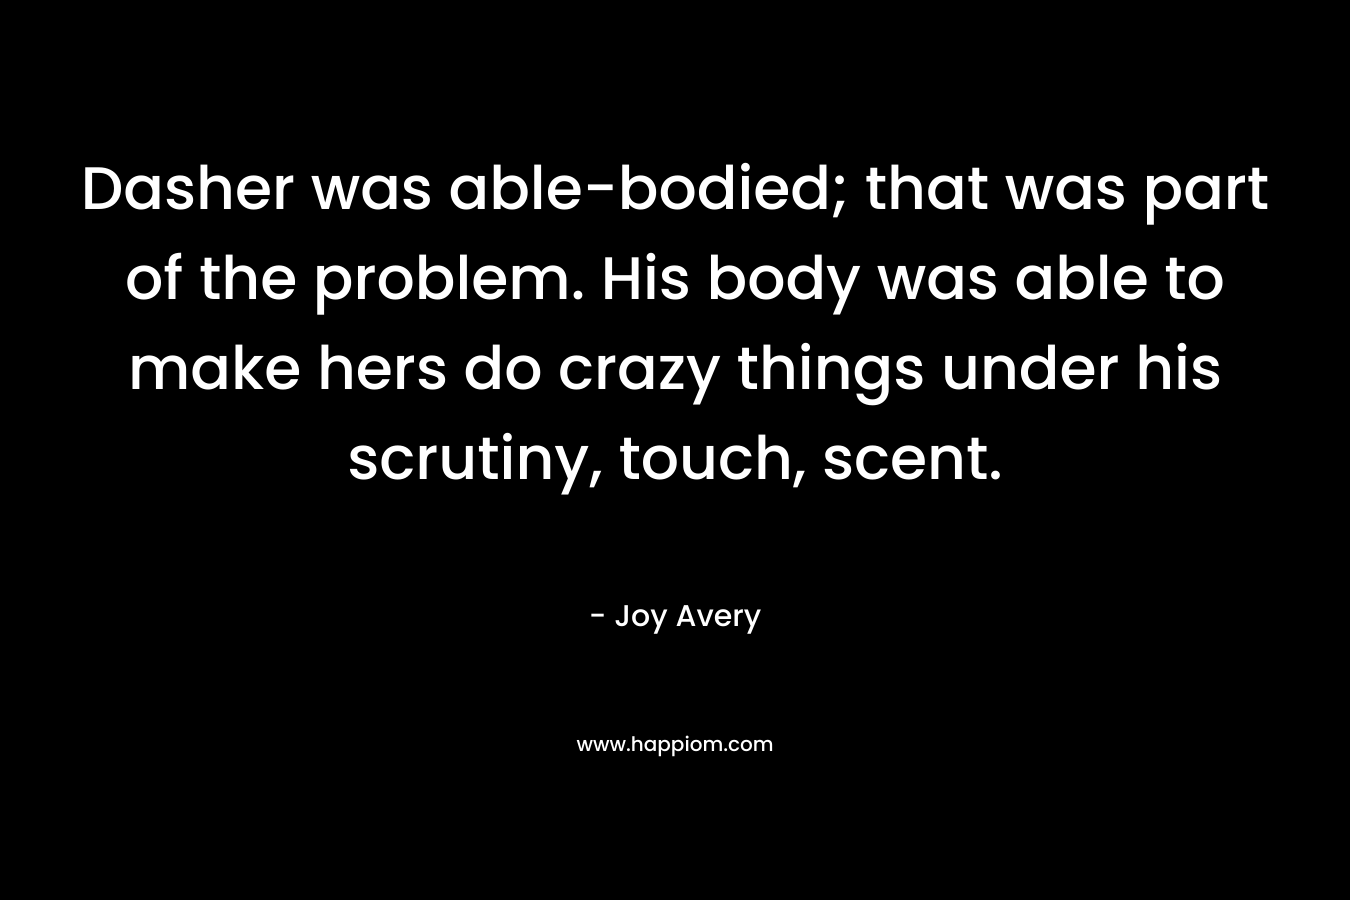 Dasher was able-bodied; that was part of the problem. His body was able to make hers do crazy things under his scrutiny, touch, scent. – Joy Avery